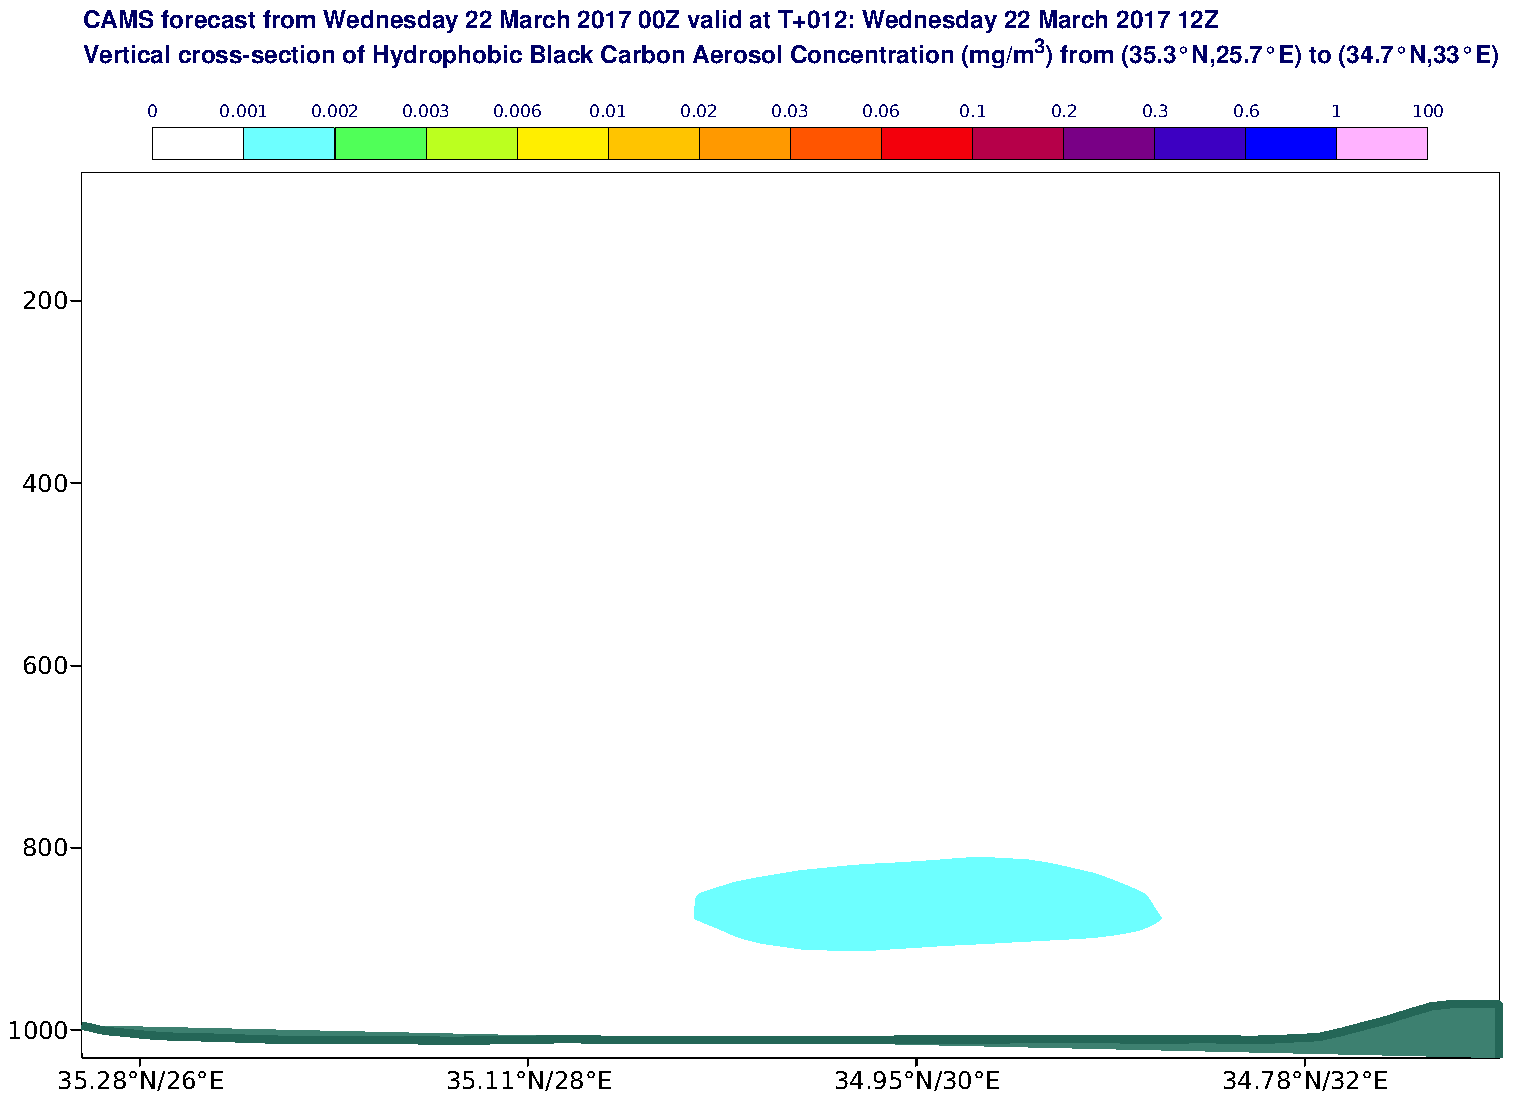 Vertical cross-section of Hydrophobic Black Carbon Aerosol Concentration (mg/m3) valid at T12 - 2017-03-22 12:00